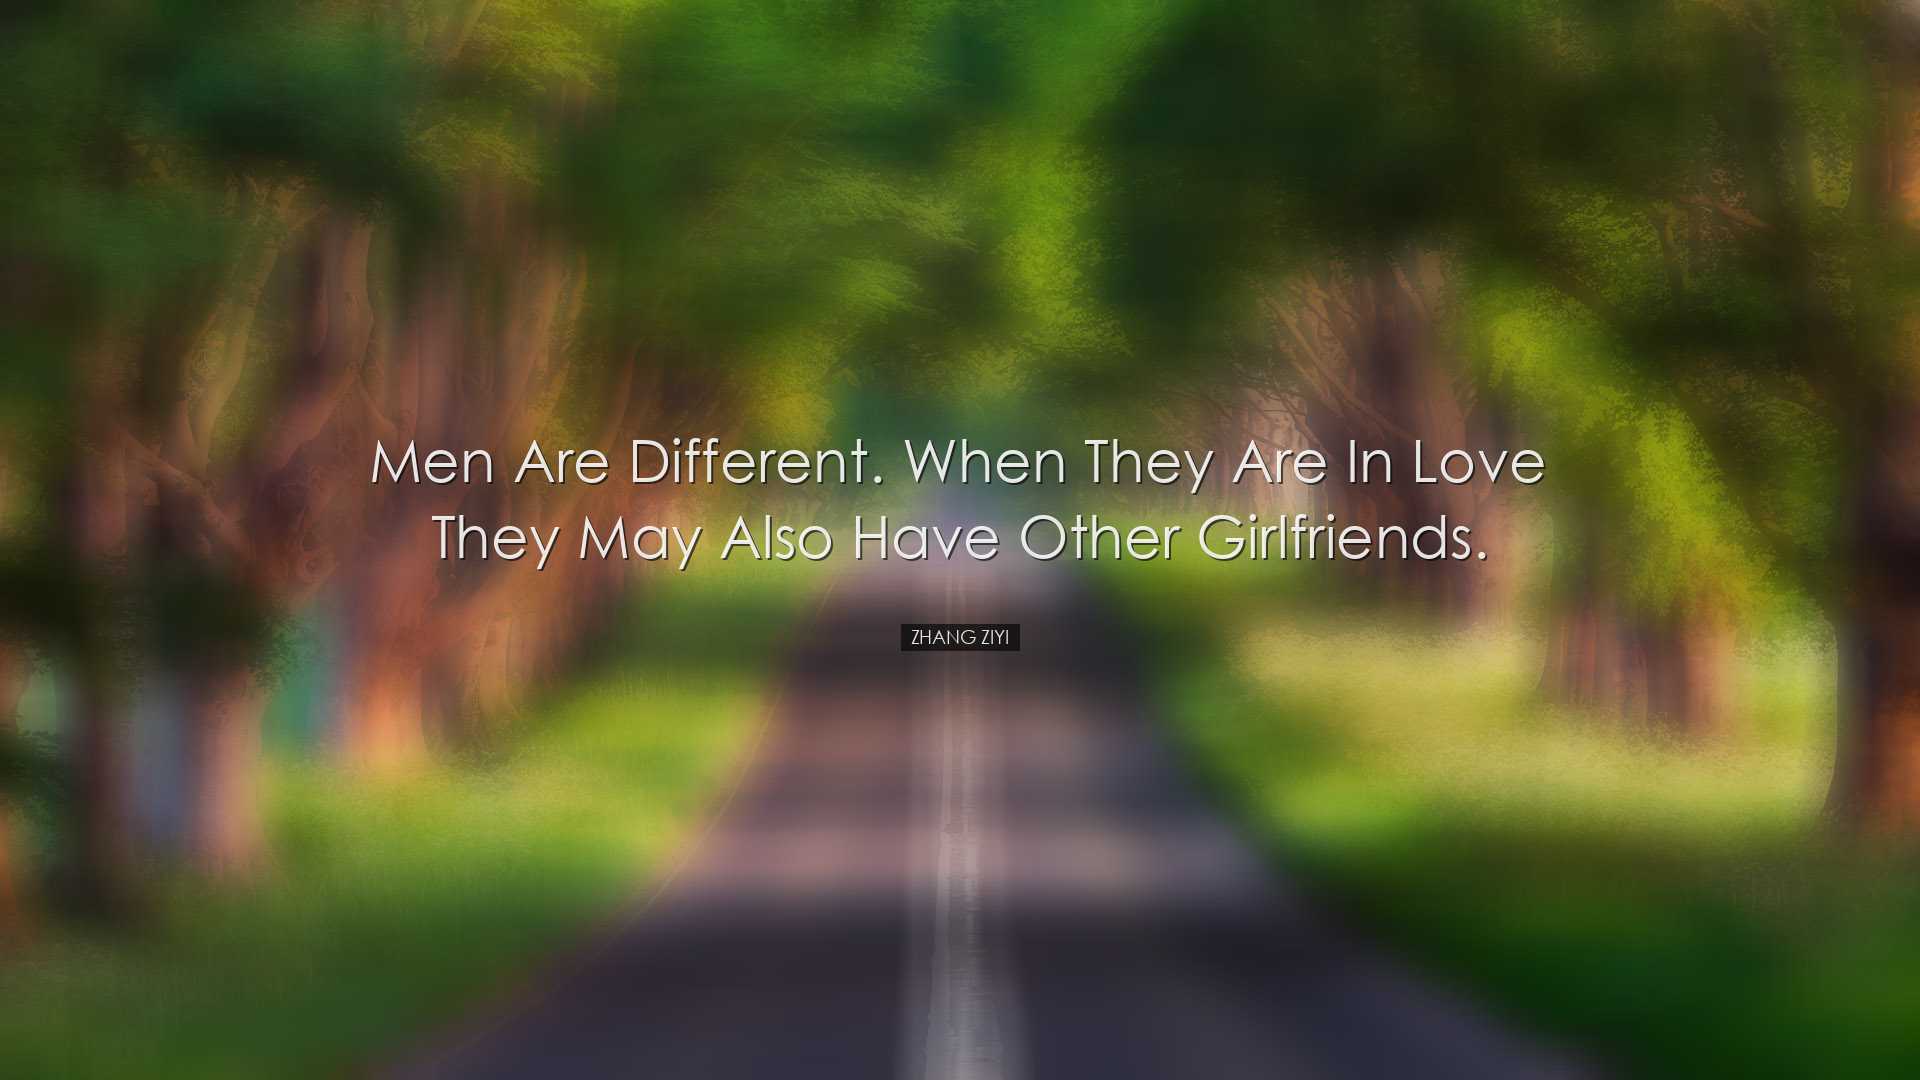 Men are different. When they are in love they may also have other